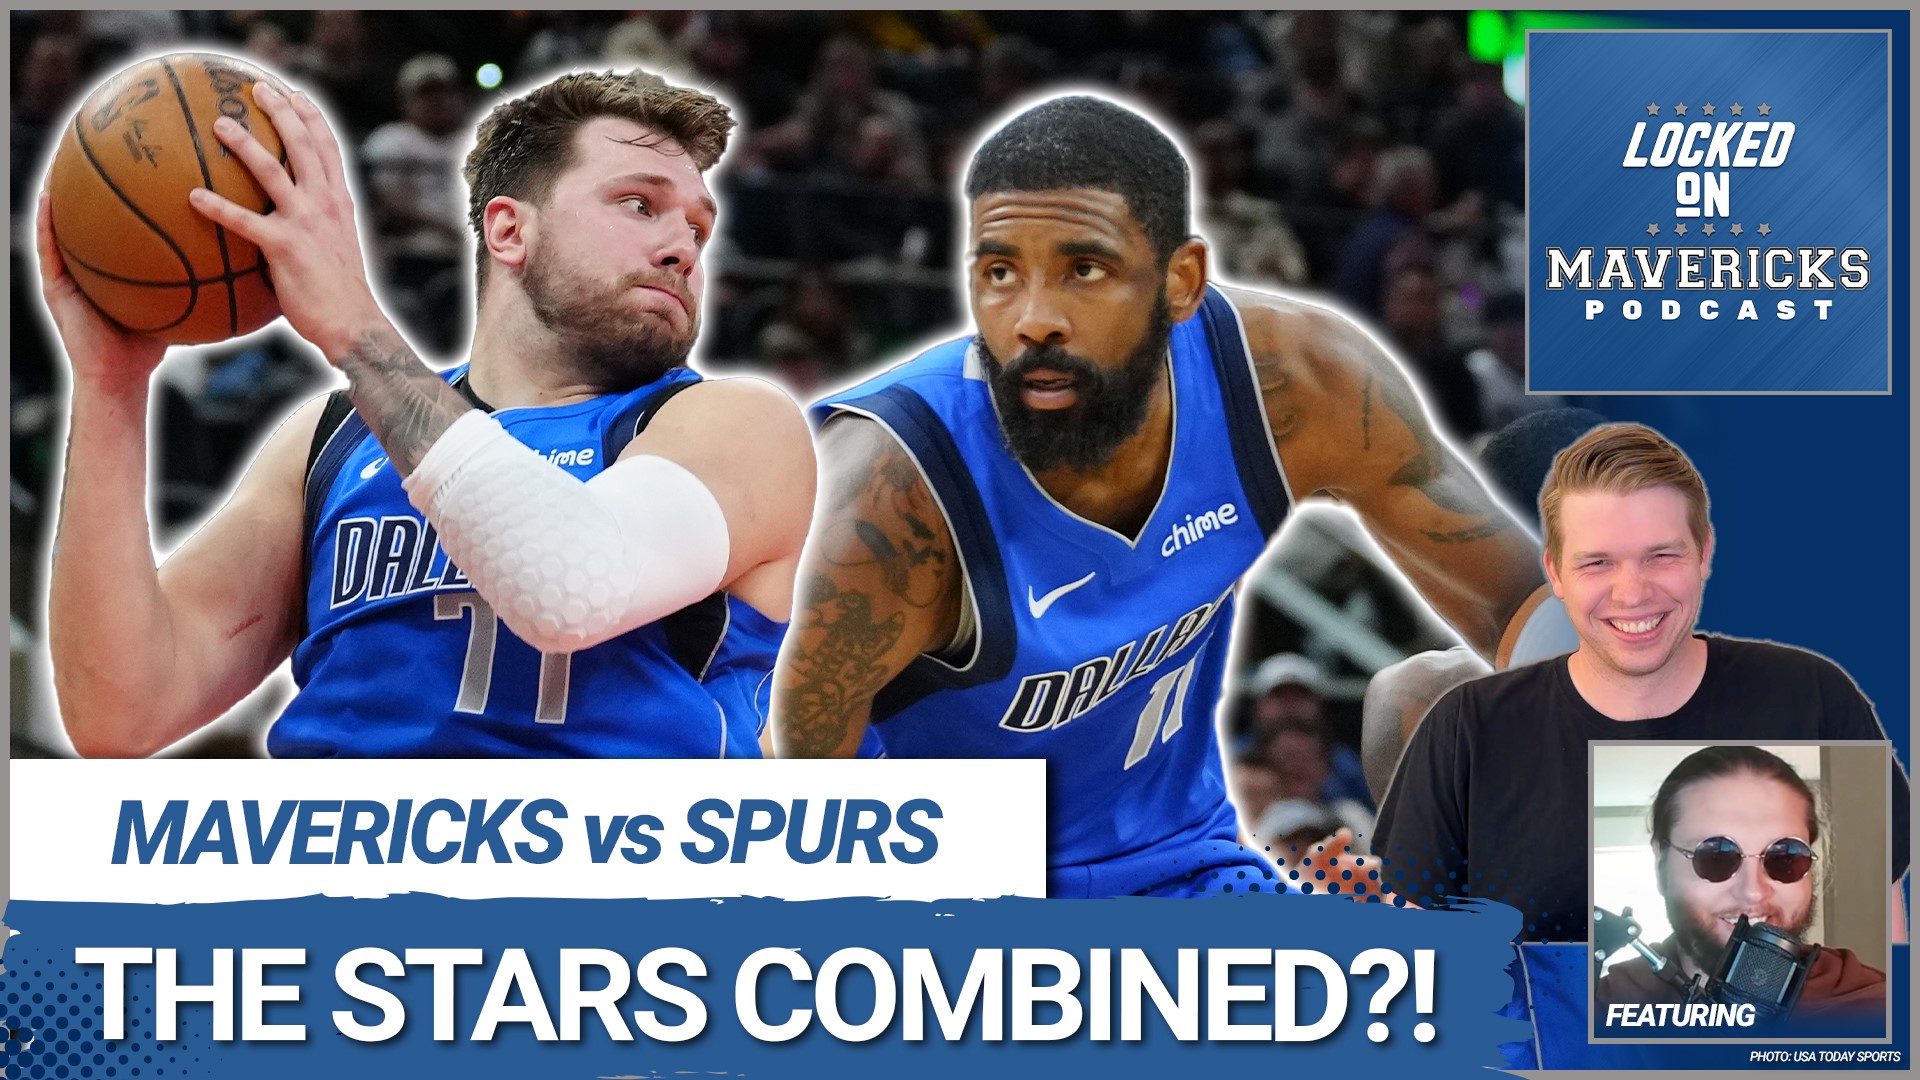 Nick Angstadt & Slightly Biased breakdown the Dallas Mavericks win over the Spurs where Luka Doncic & Kyrie Irving had completely opposite games.